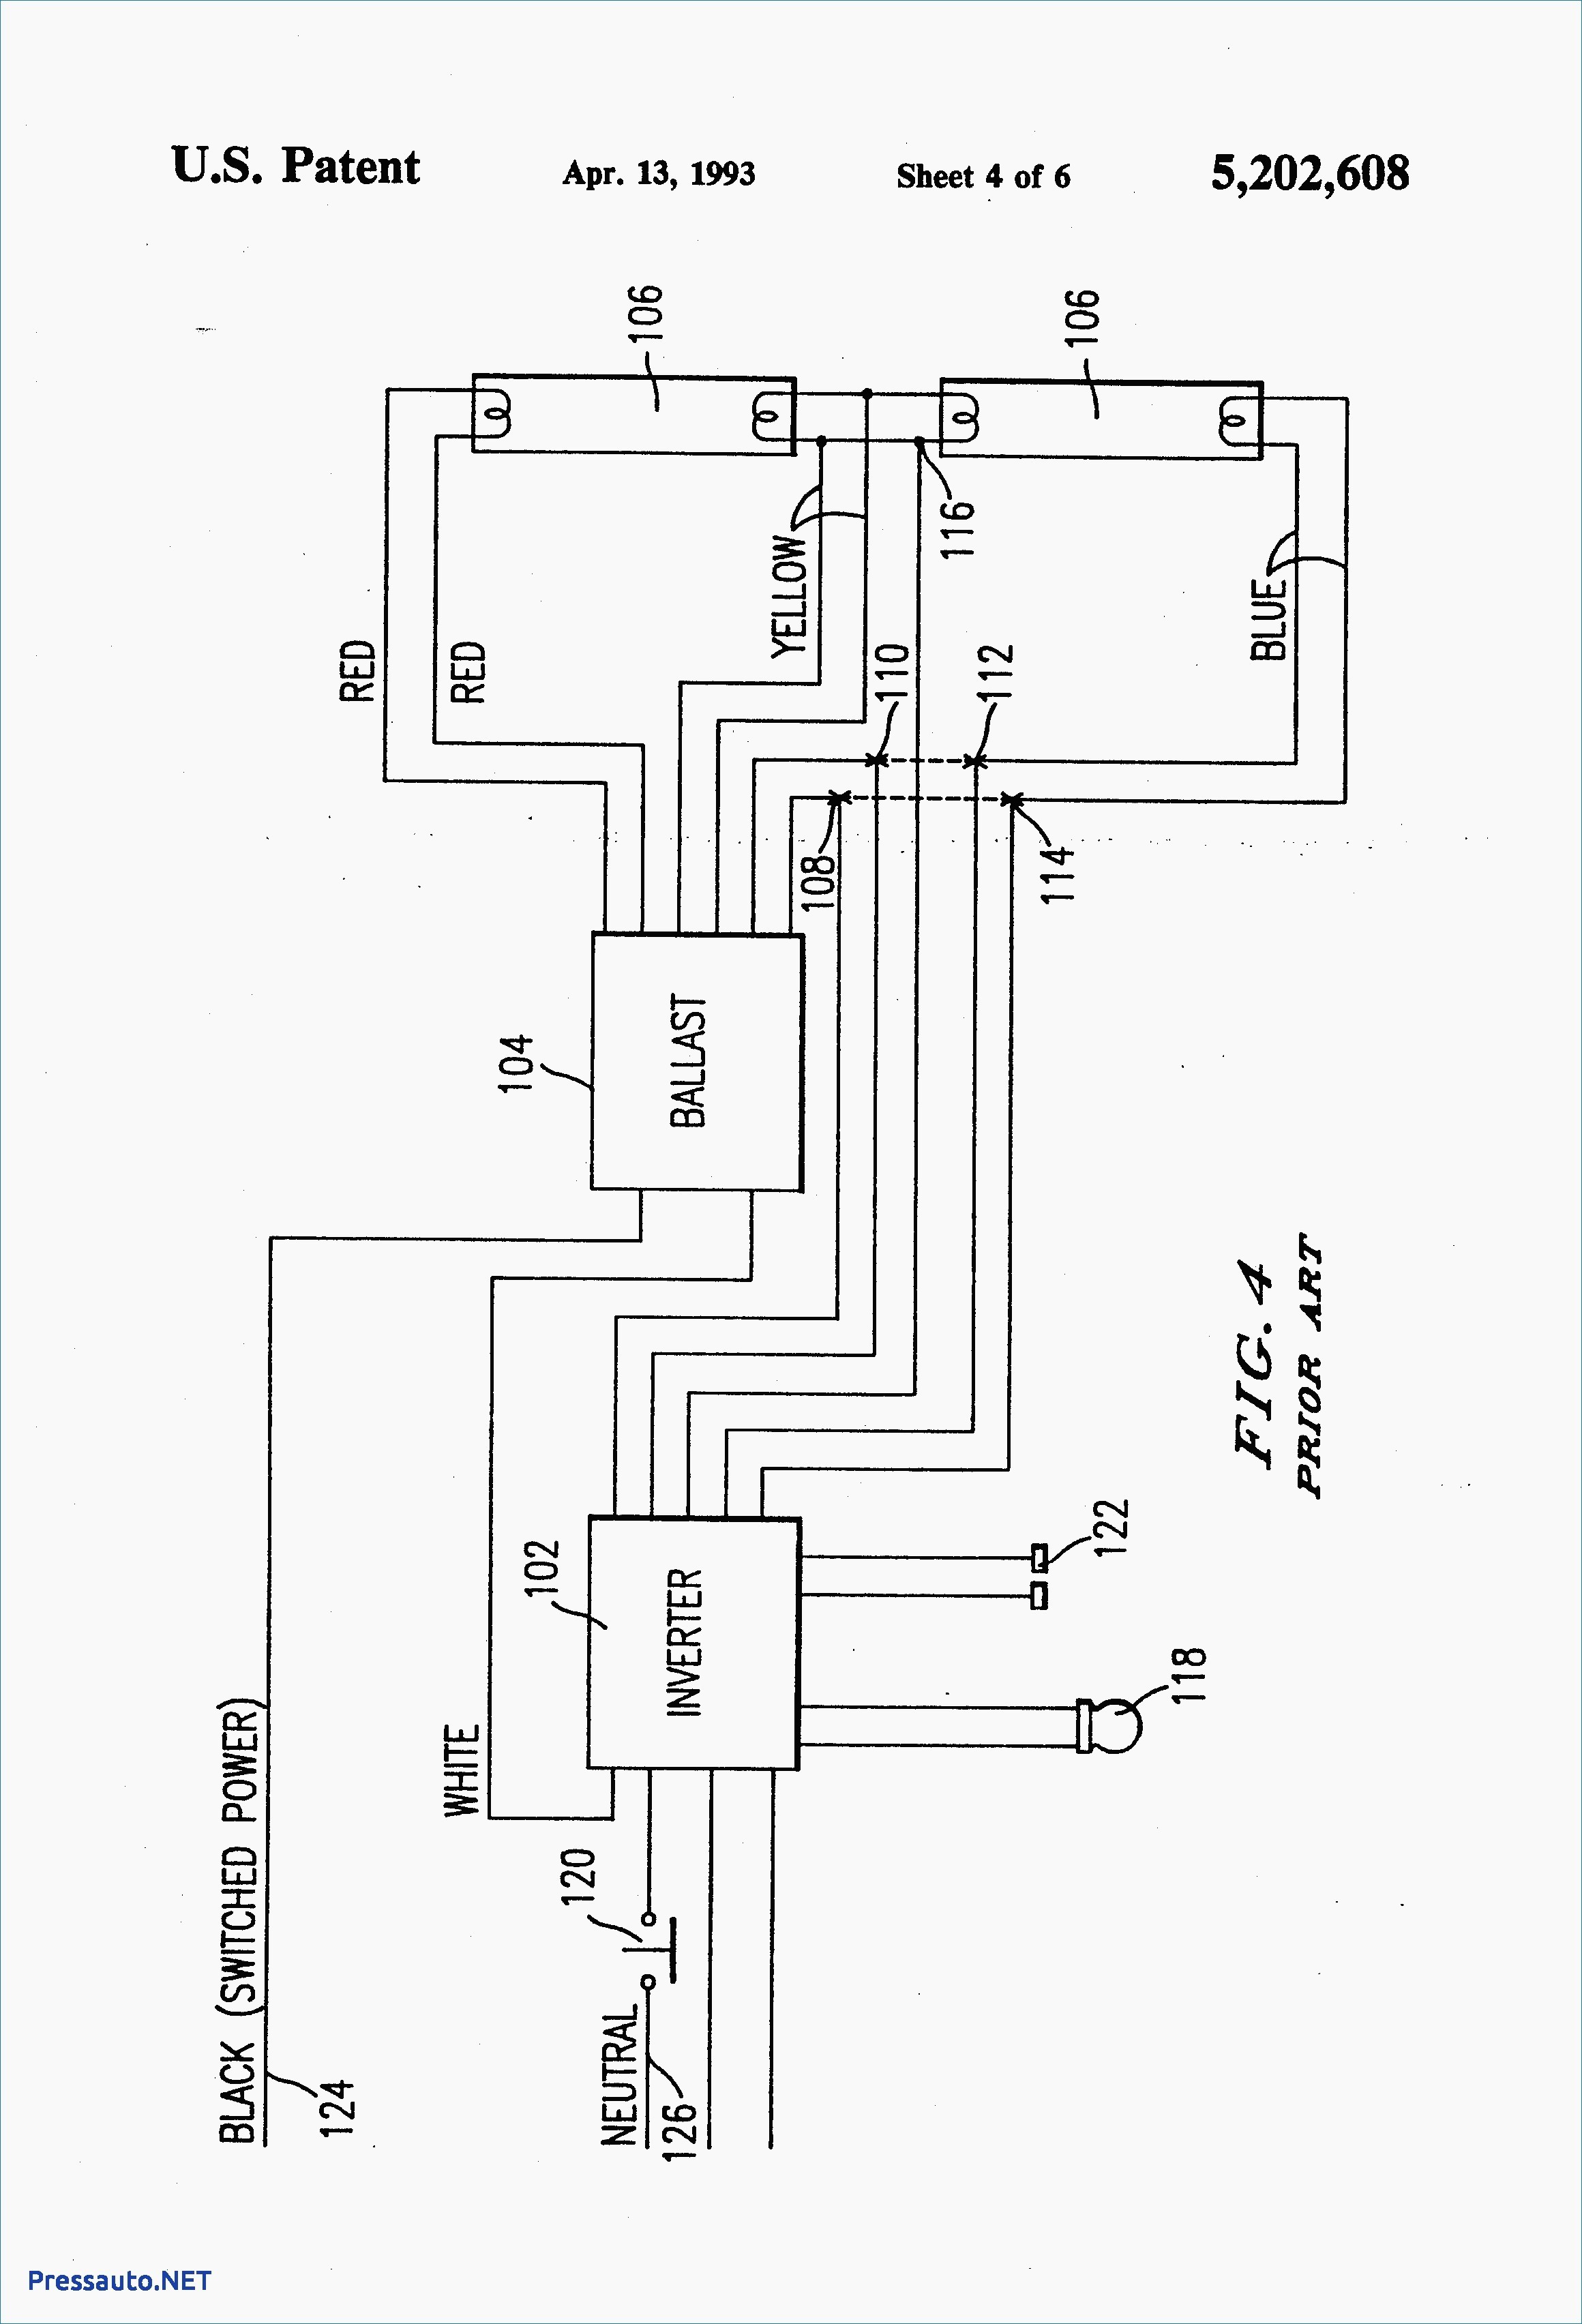 Wiring Diagram for Lighting Contactor New Wiring Diagram with Contactor New Lighting Contactor Wiring Diagram